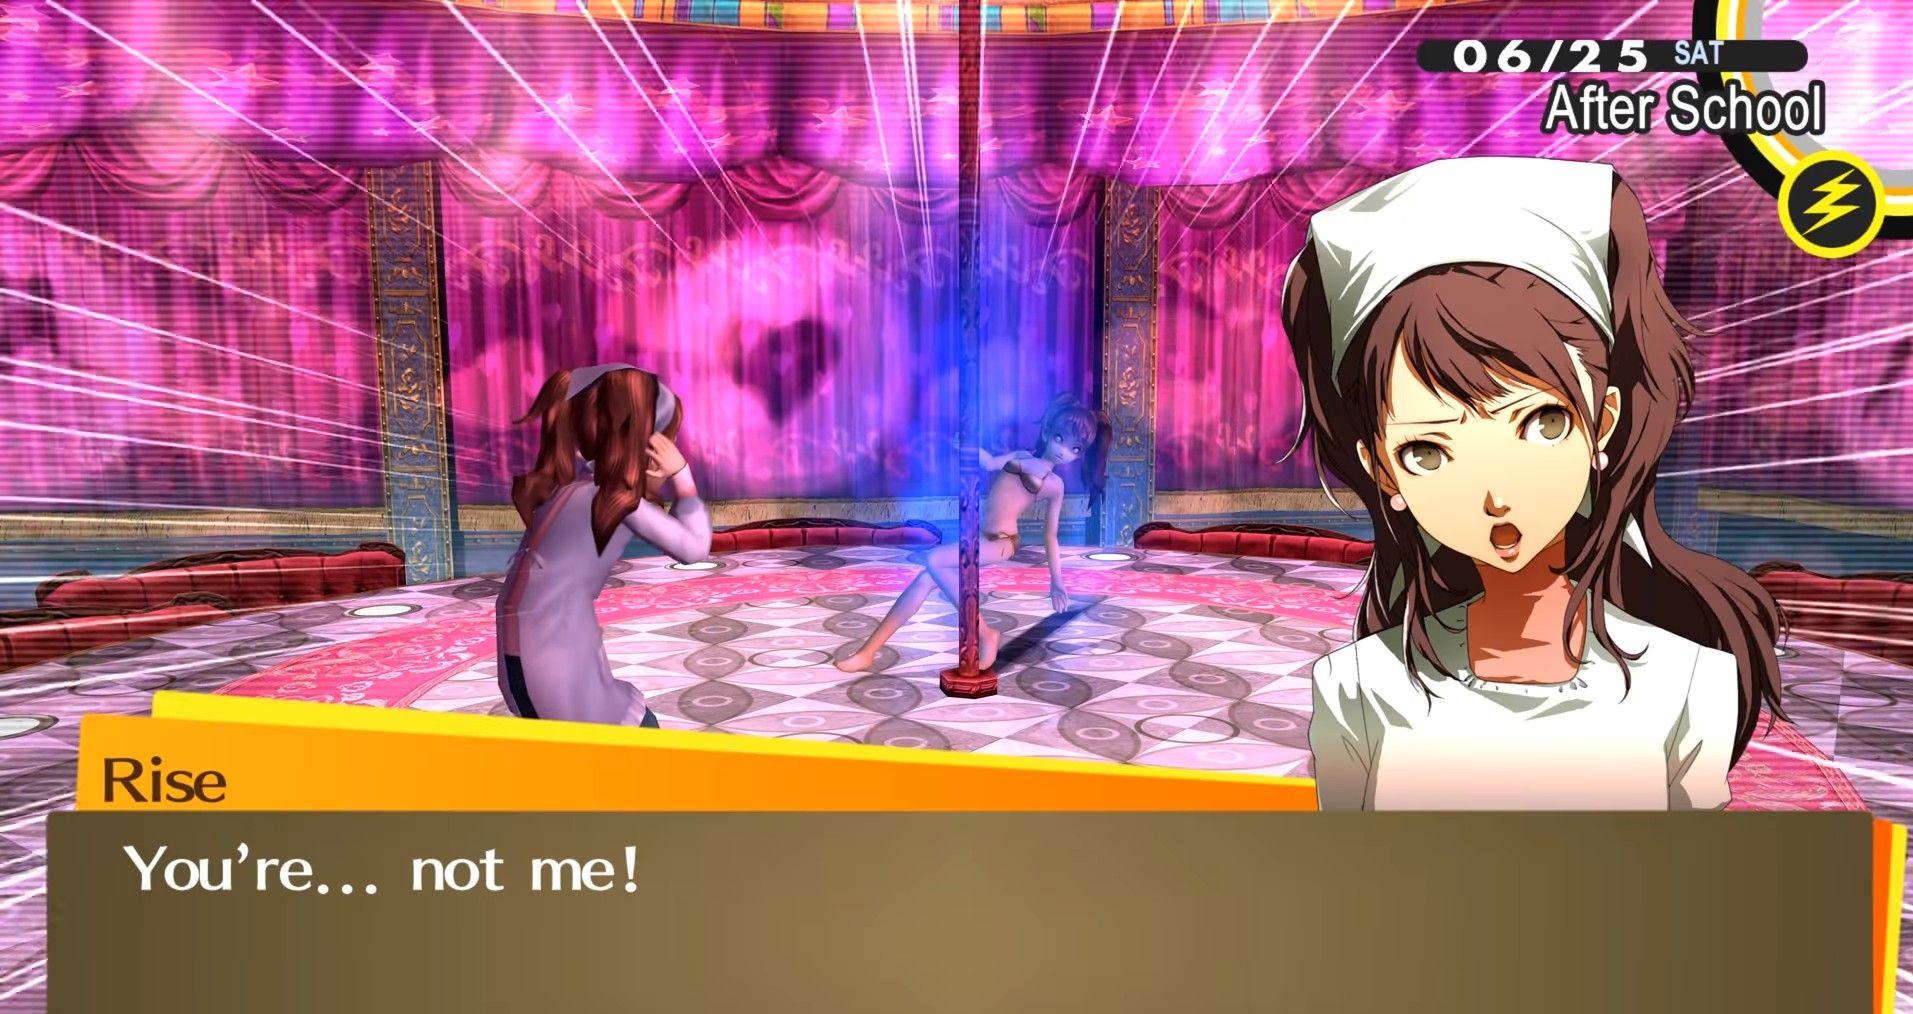 rise denying her shadow self in the marukyu striptease dungeon in persona 4 golden rise's dungeon p4g